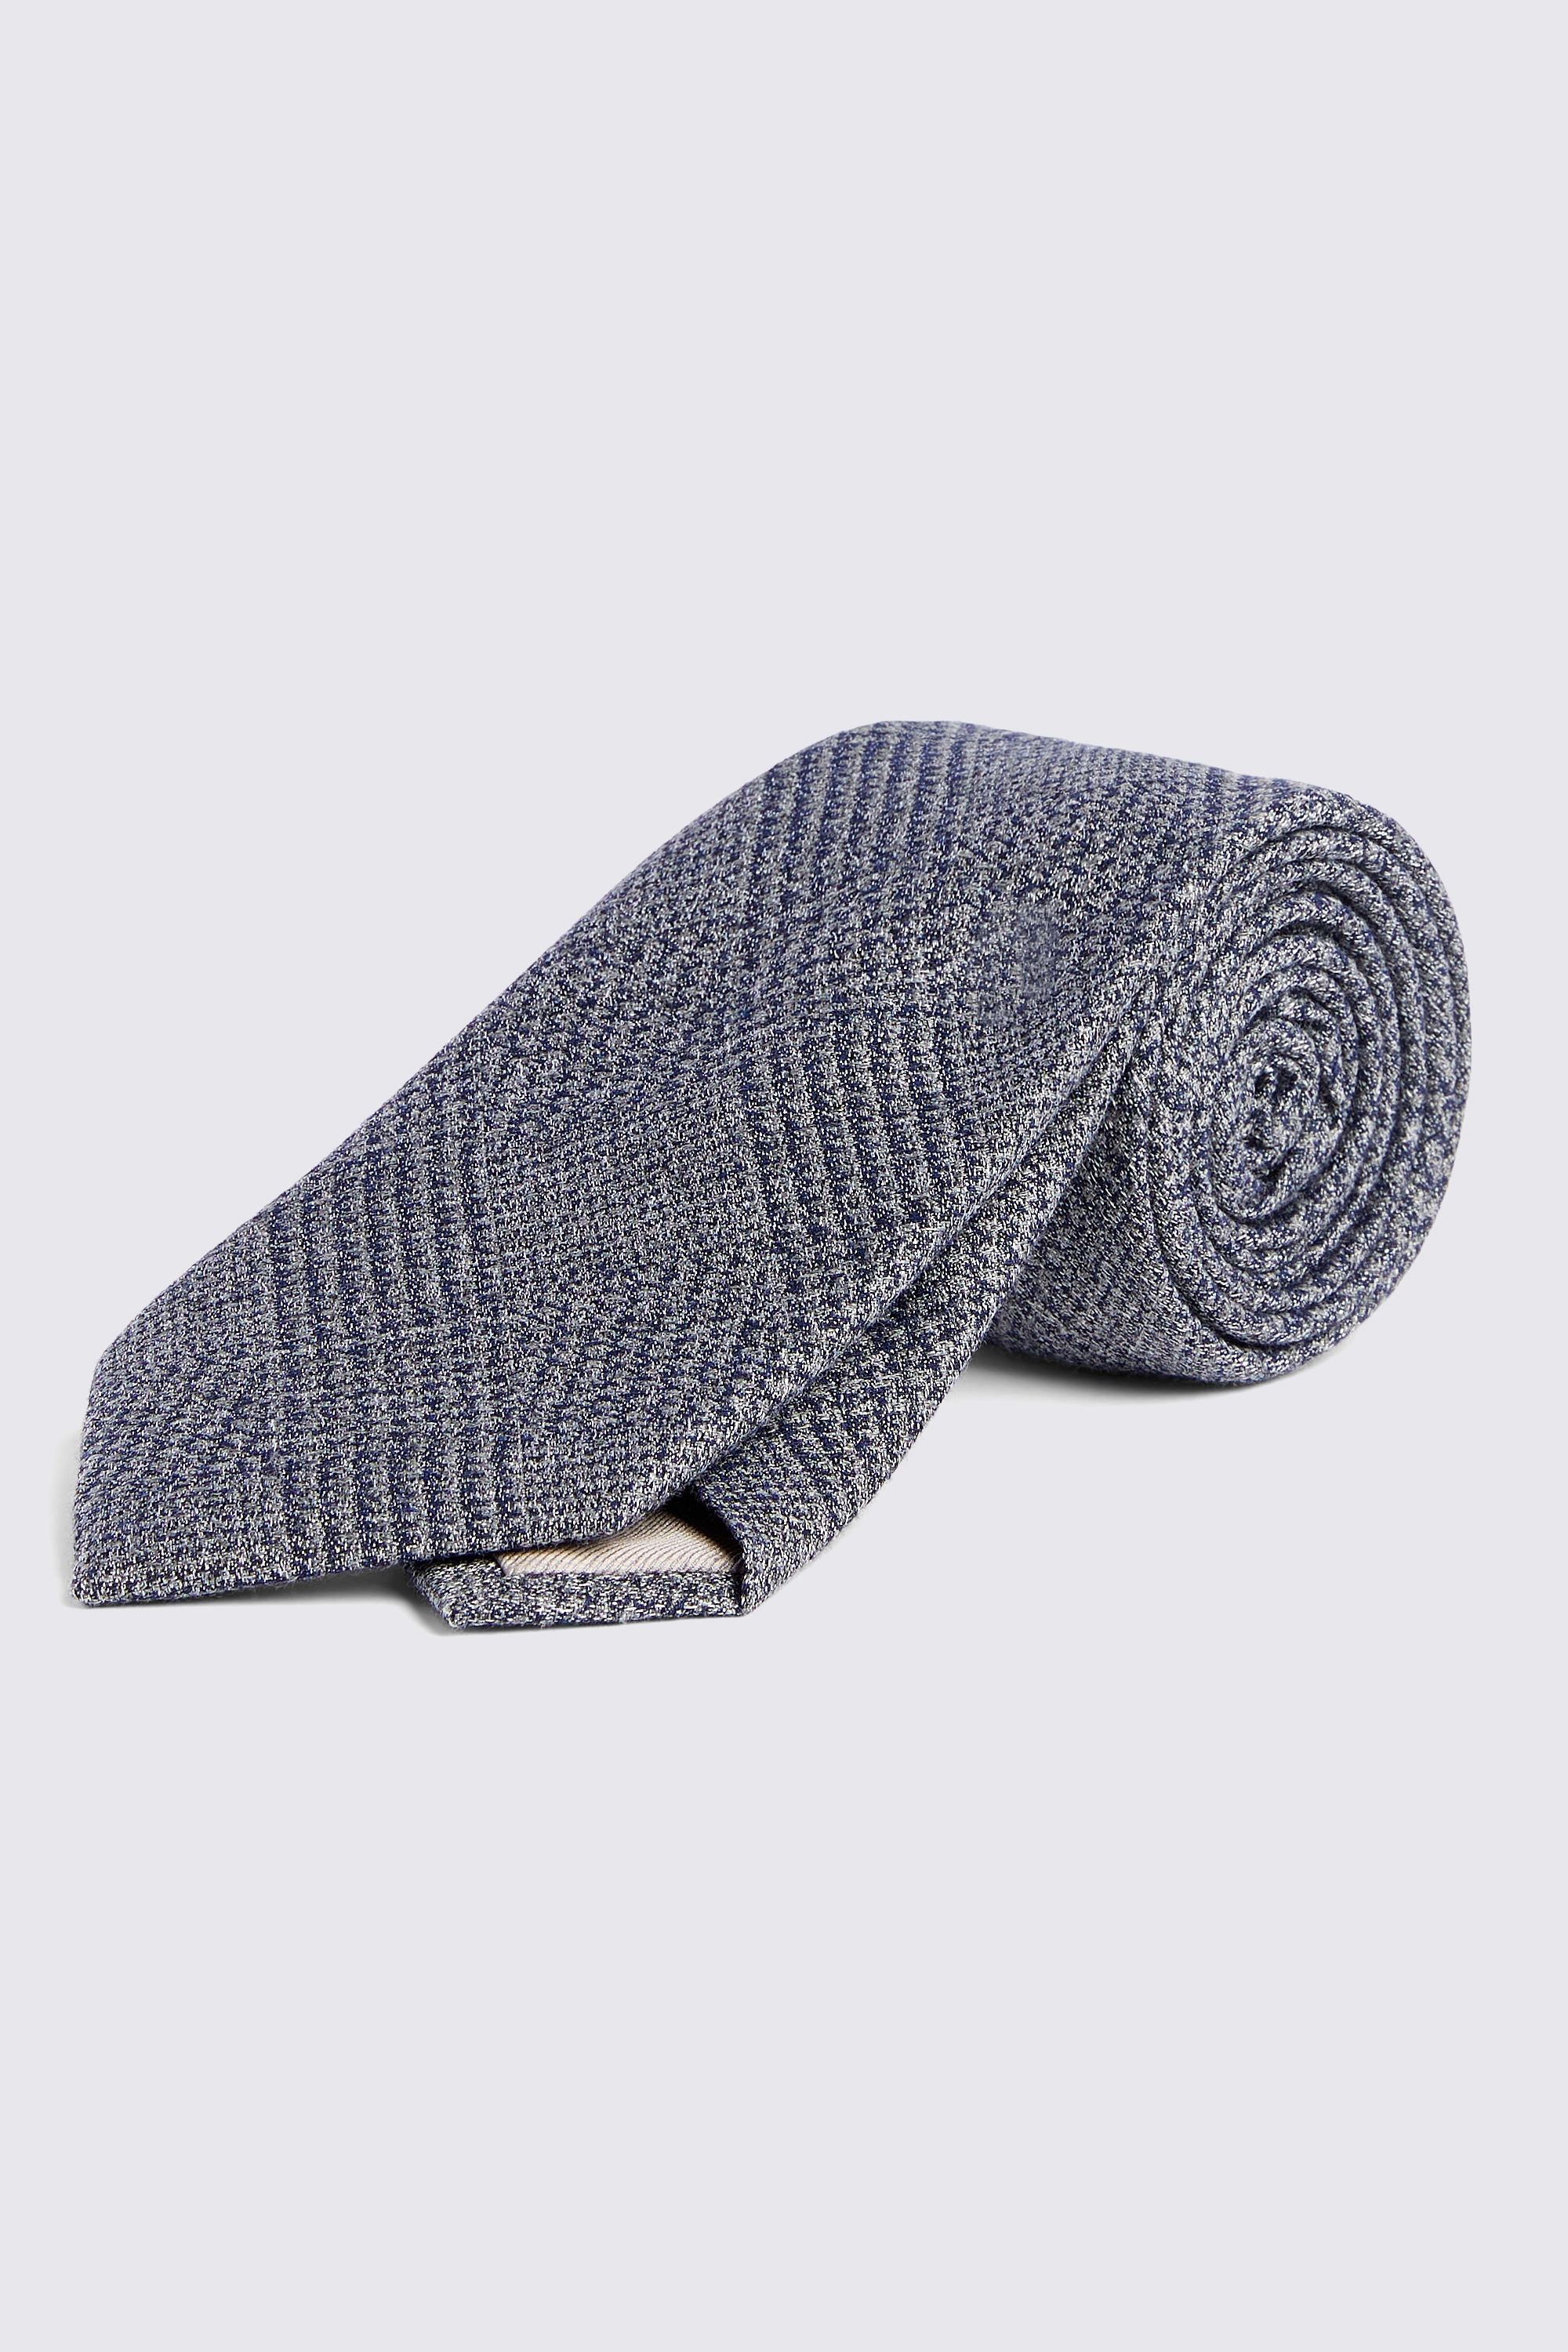 Navy Silk Blend Prince of Wales Check Tie | Buy Online at Moss